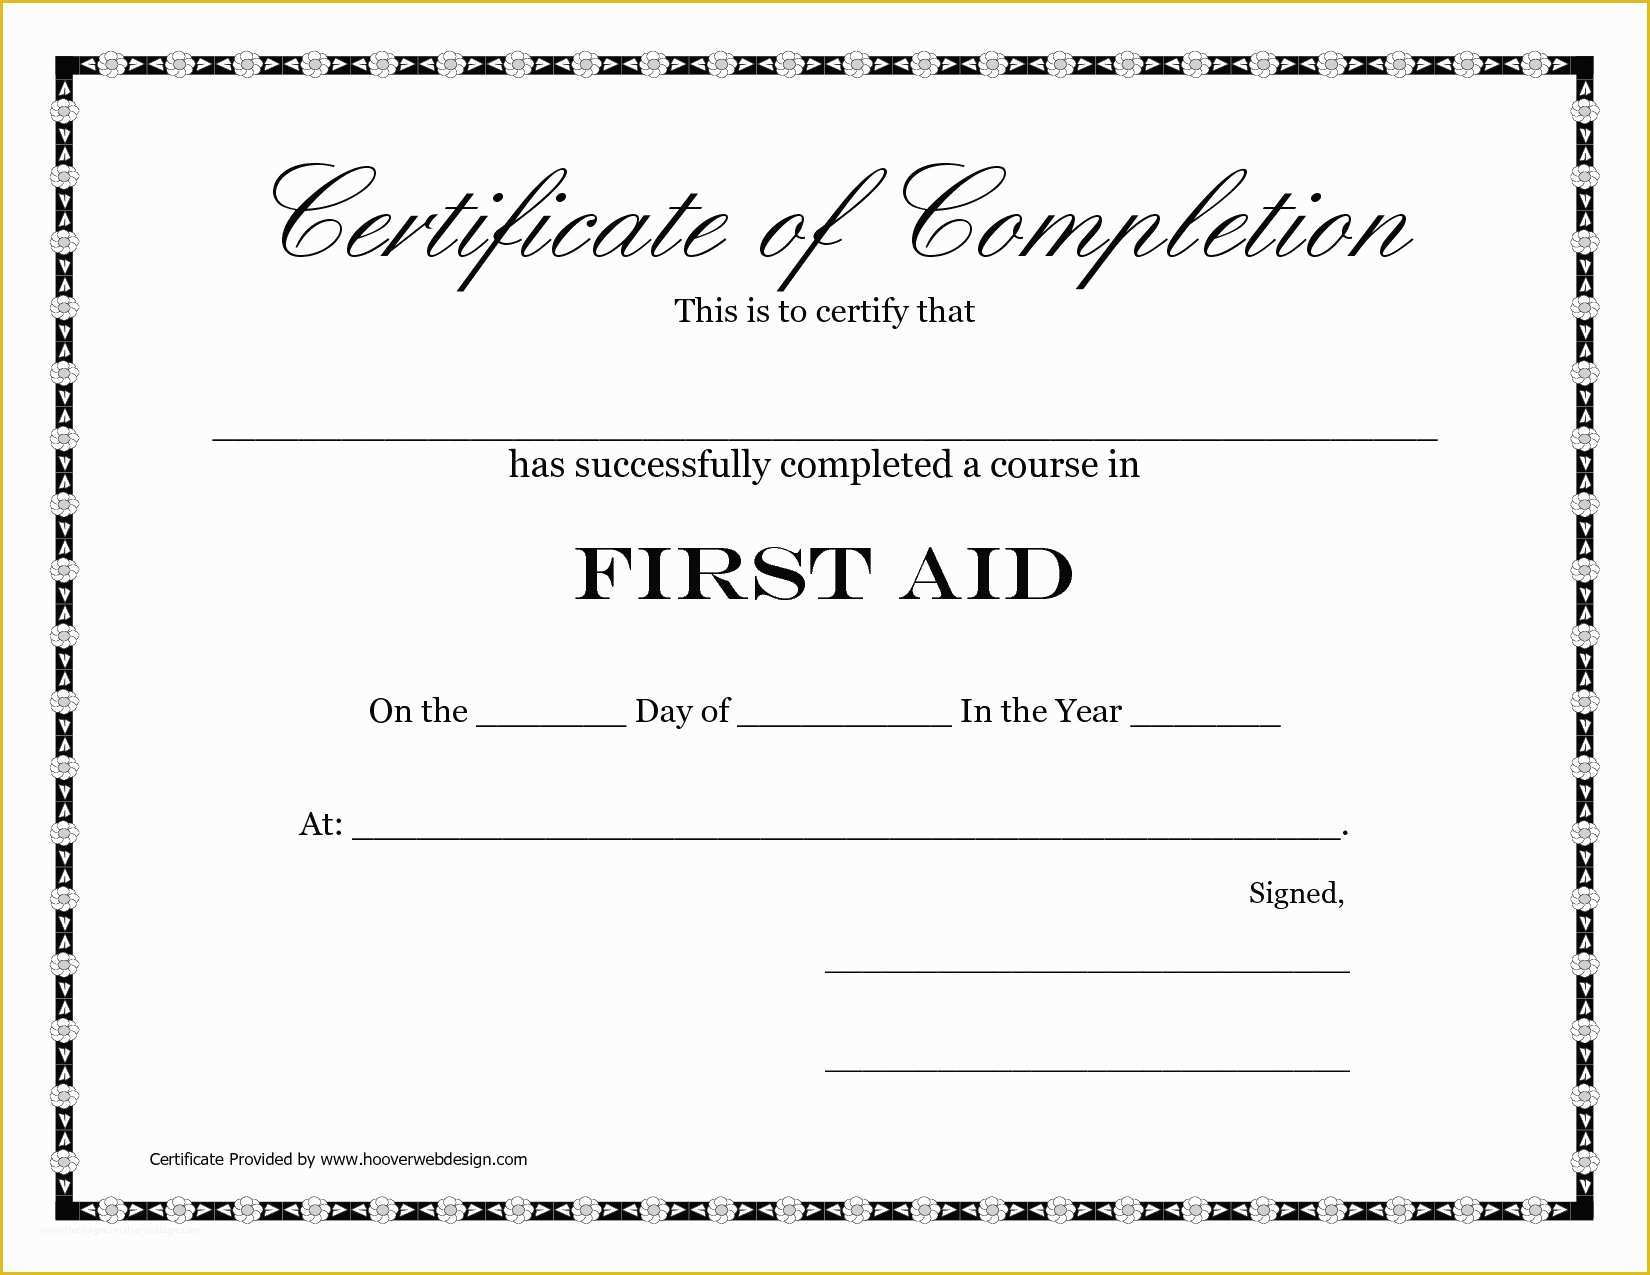 First Aid Certificate Template Free Of First Aid Certificate Template Free Better First Aid